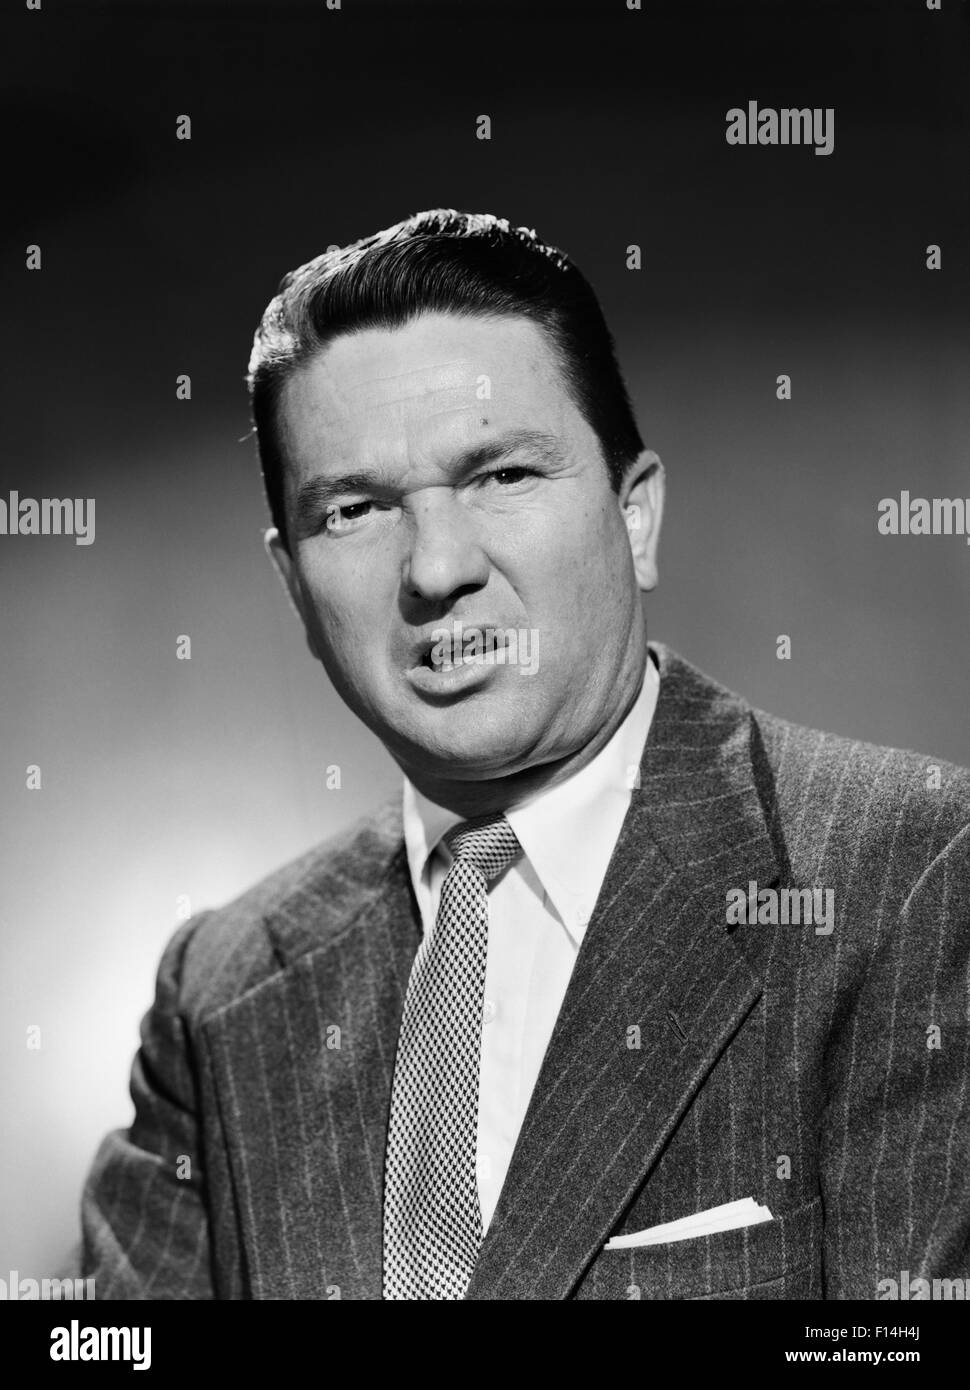 1950s BUSINESSMAN IN SUIT MAKING FUNNY SERIOUS FROWN FACIAL EXPRESSION SNEER DISGUST ANGER UNHAPPY ANGRY UNPLEASANT MEAN GROUCHY Stock Photo